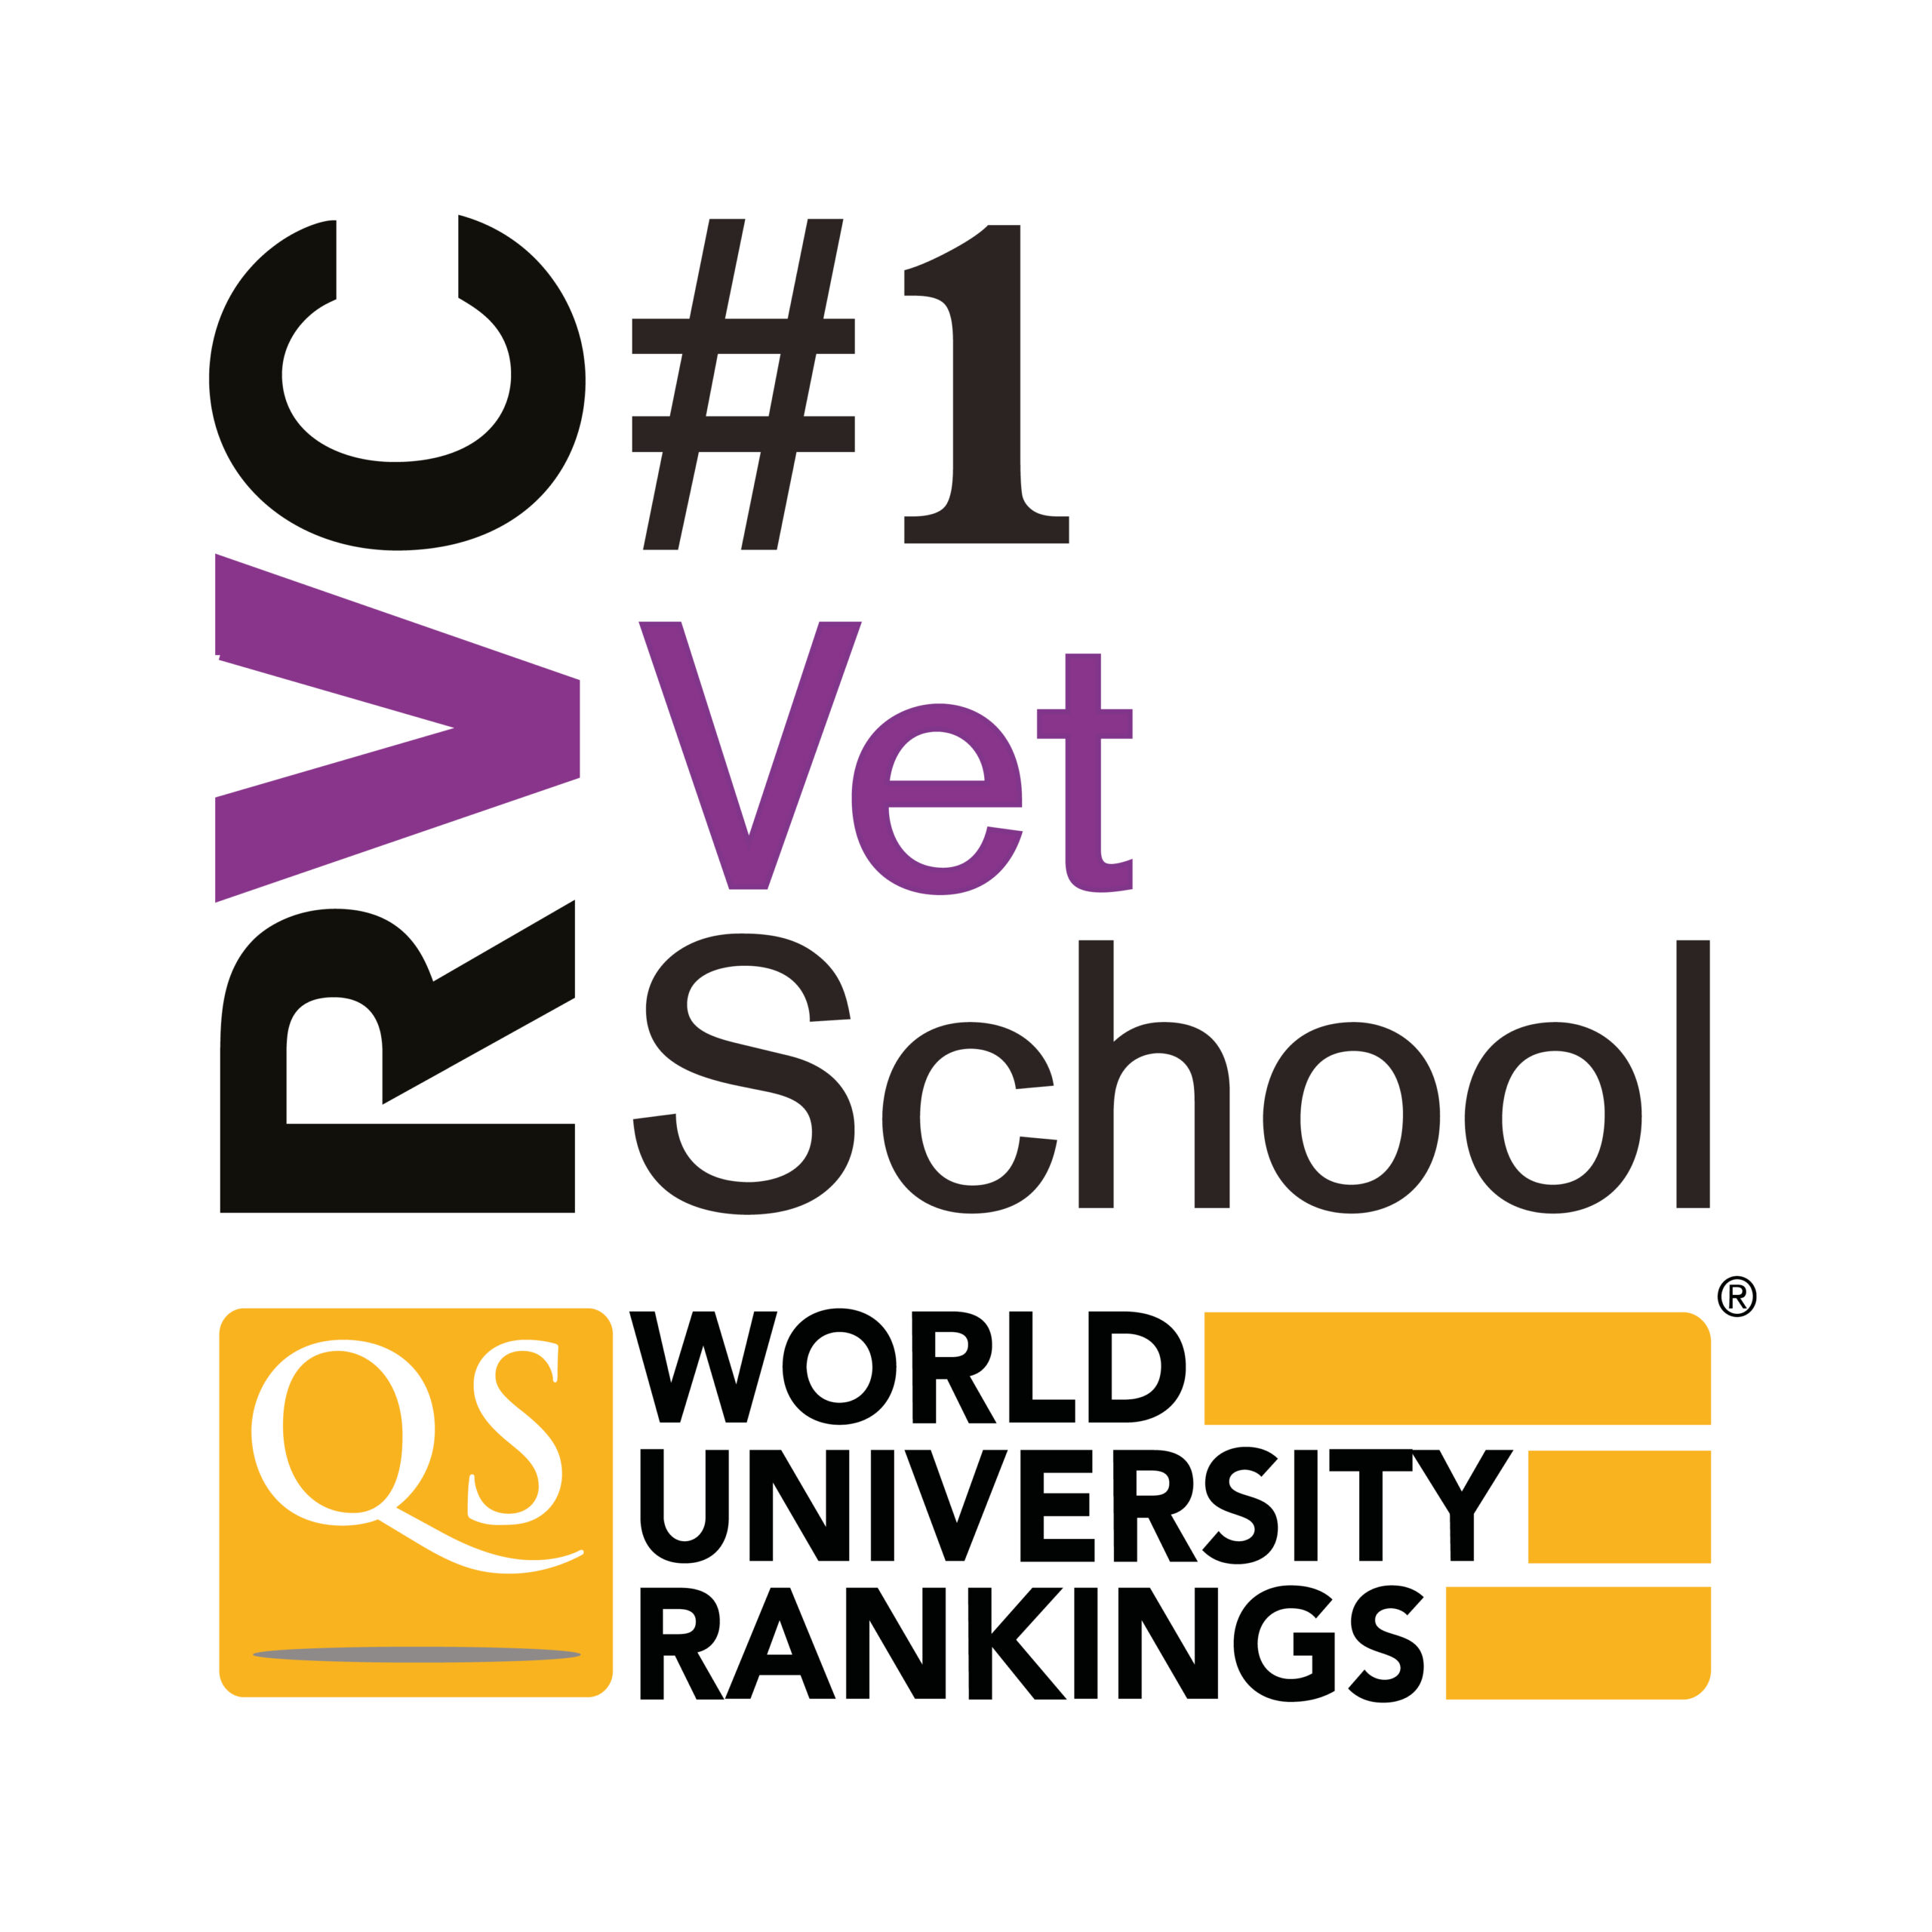 The RVC retains top spot in global rankings 2023